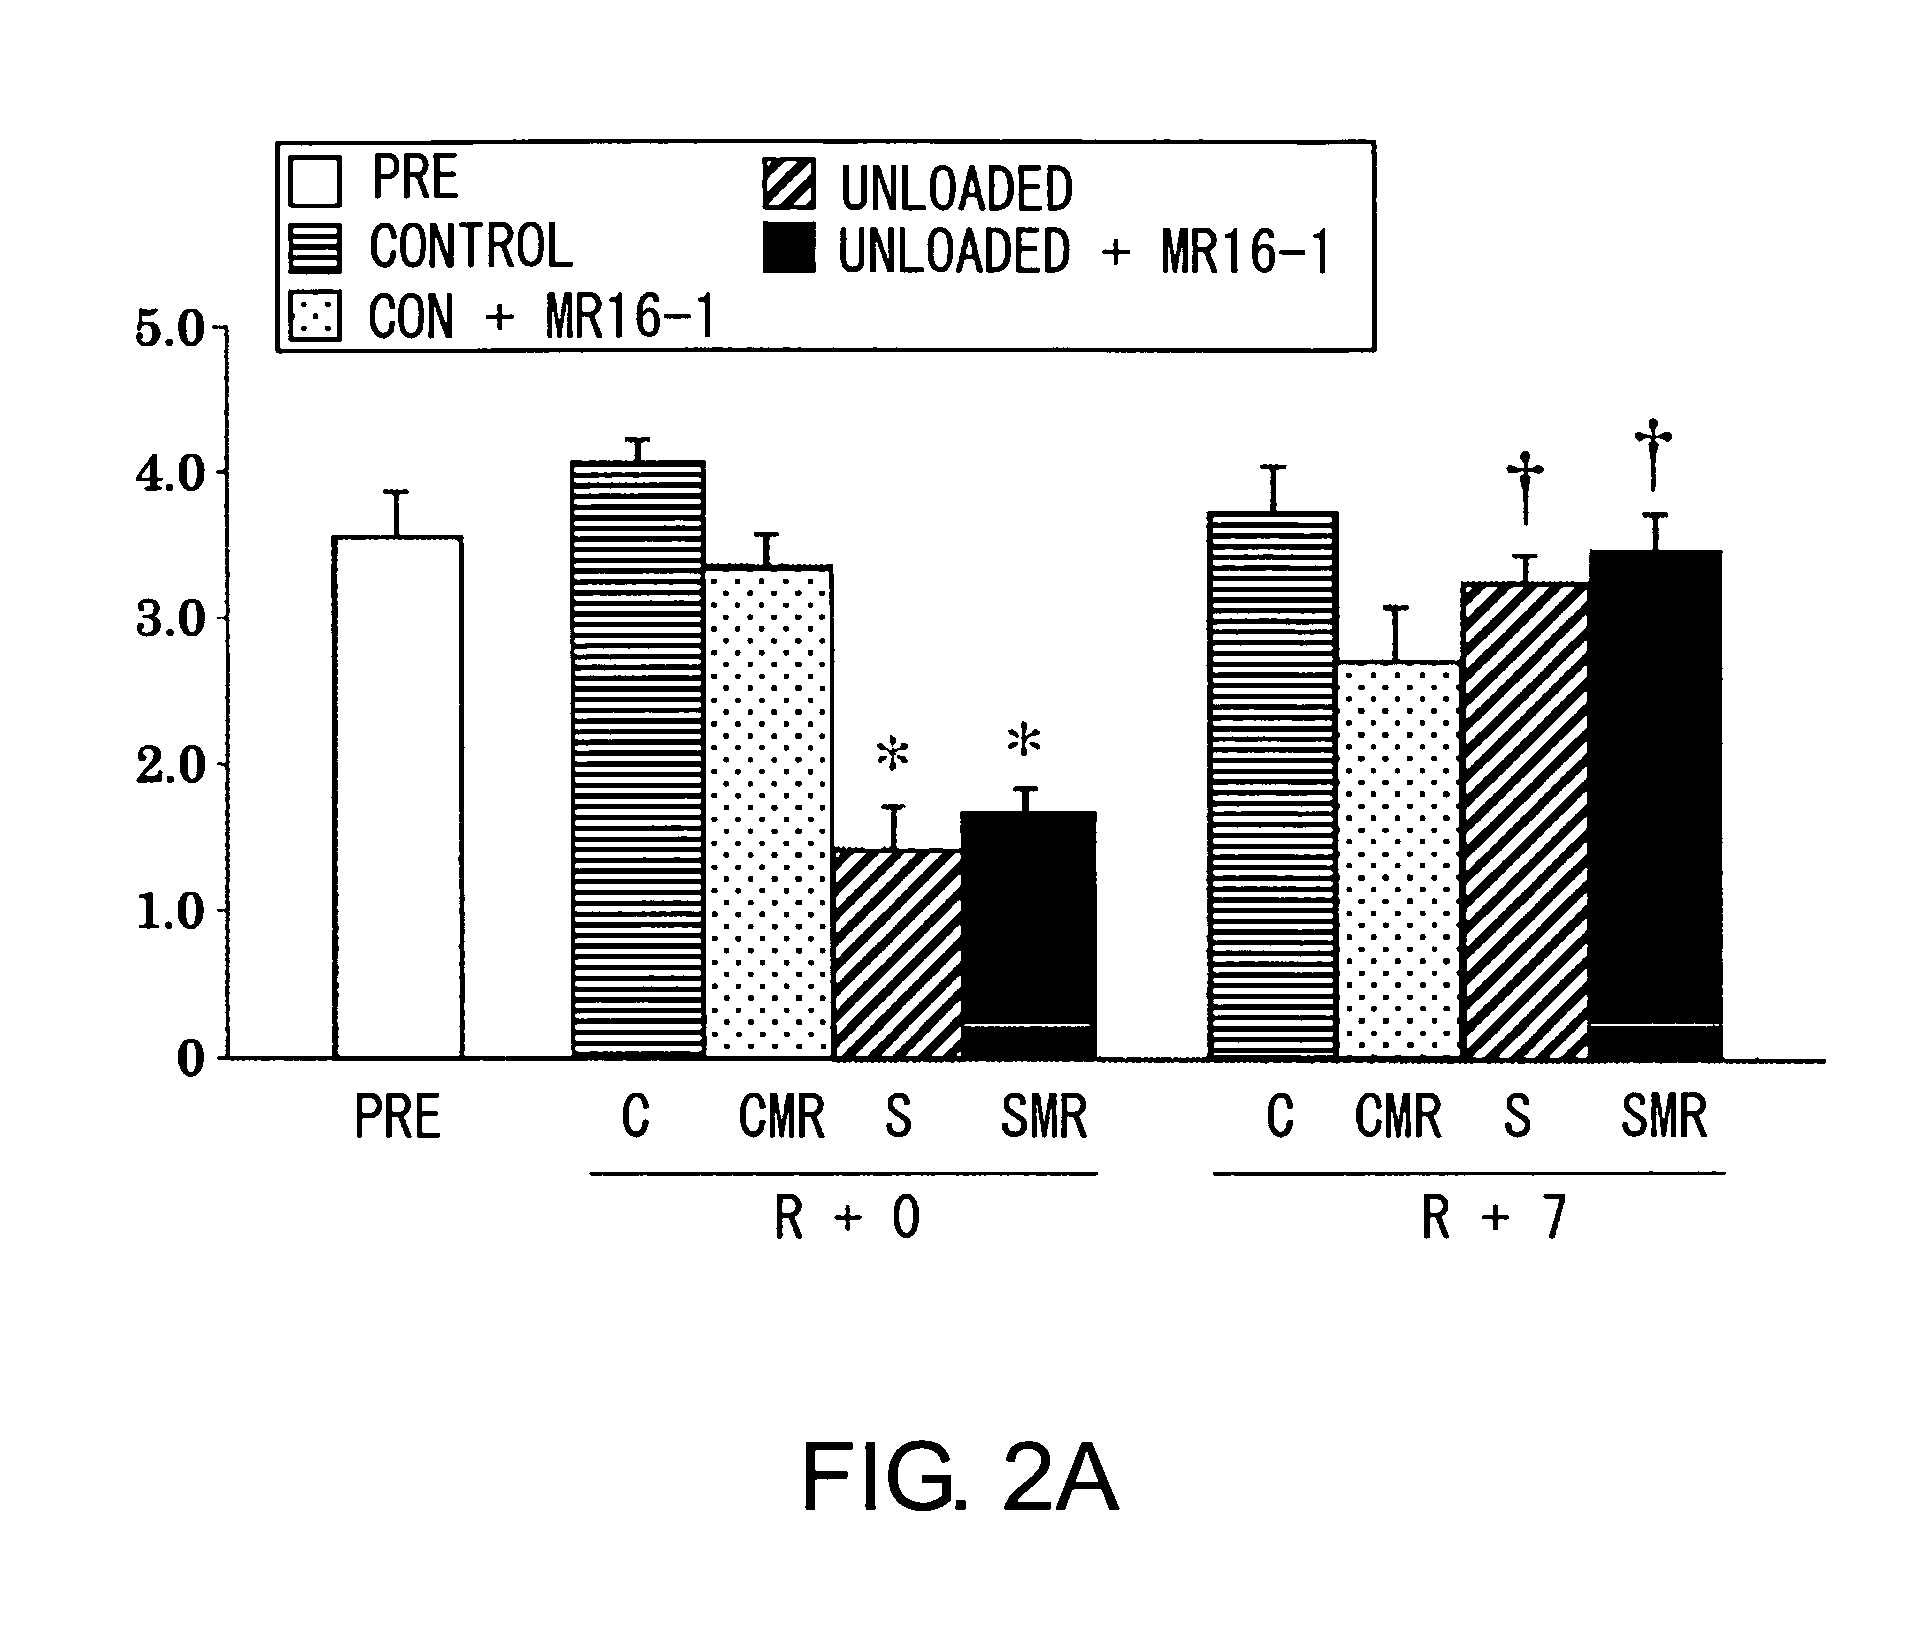 Method for promoting muscle regeneration by administering an antibody to the IL-6 receptor